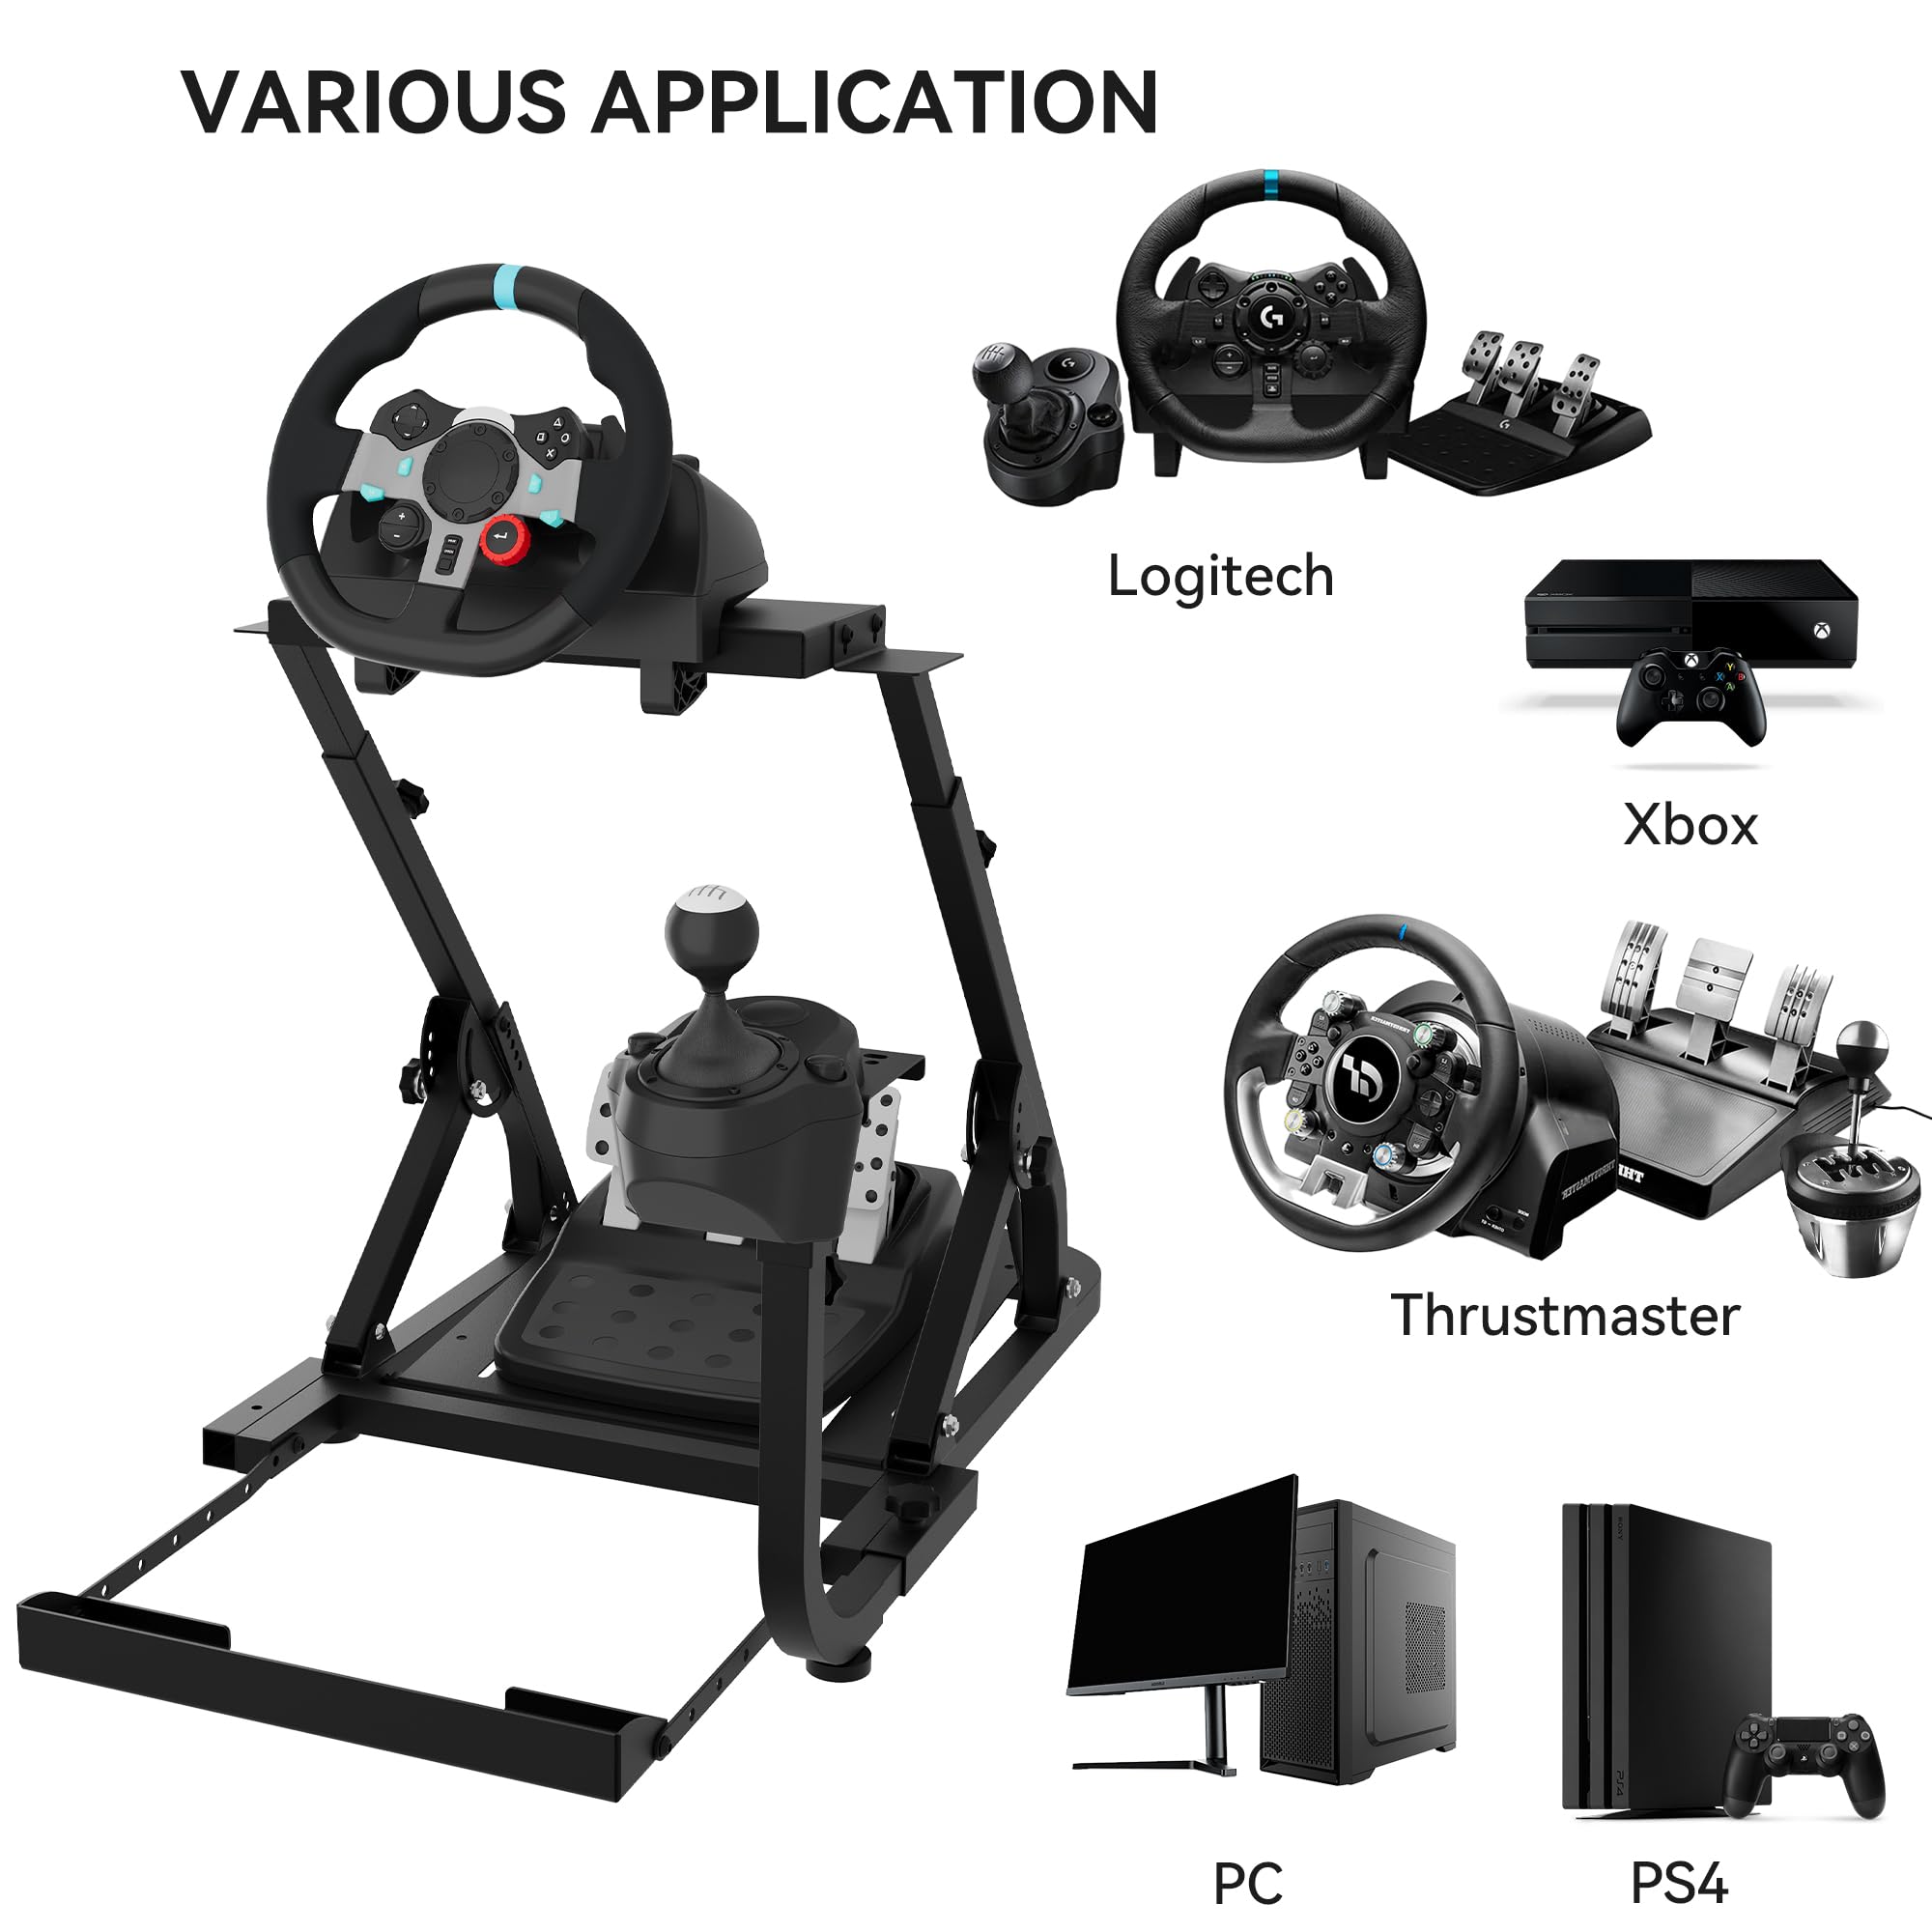 GAOMON Racing Steering Wheel Stand, Gaming Wheel Stand Suitable for Logitech G920/G25/G29, Thrustmaster T80/T150/T300 with Gear Lever Wheel Slot, Foldable (No Pedals, Handbrake, Steering Wheel)